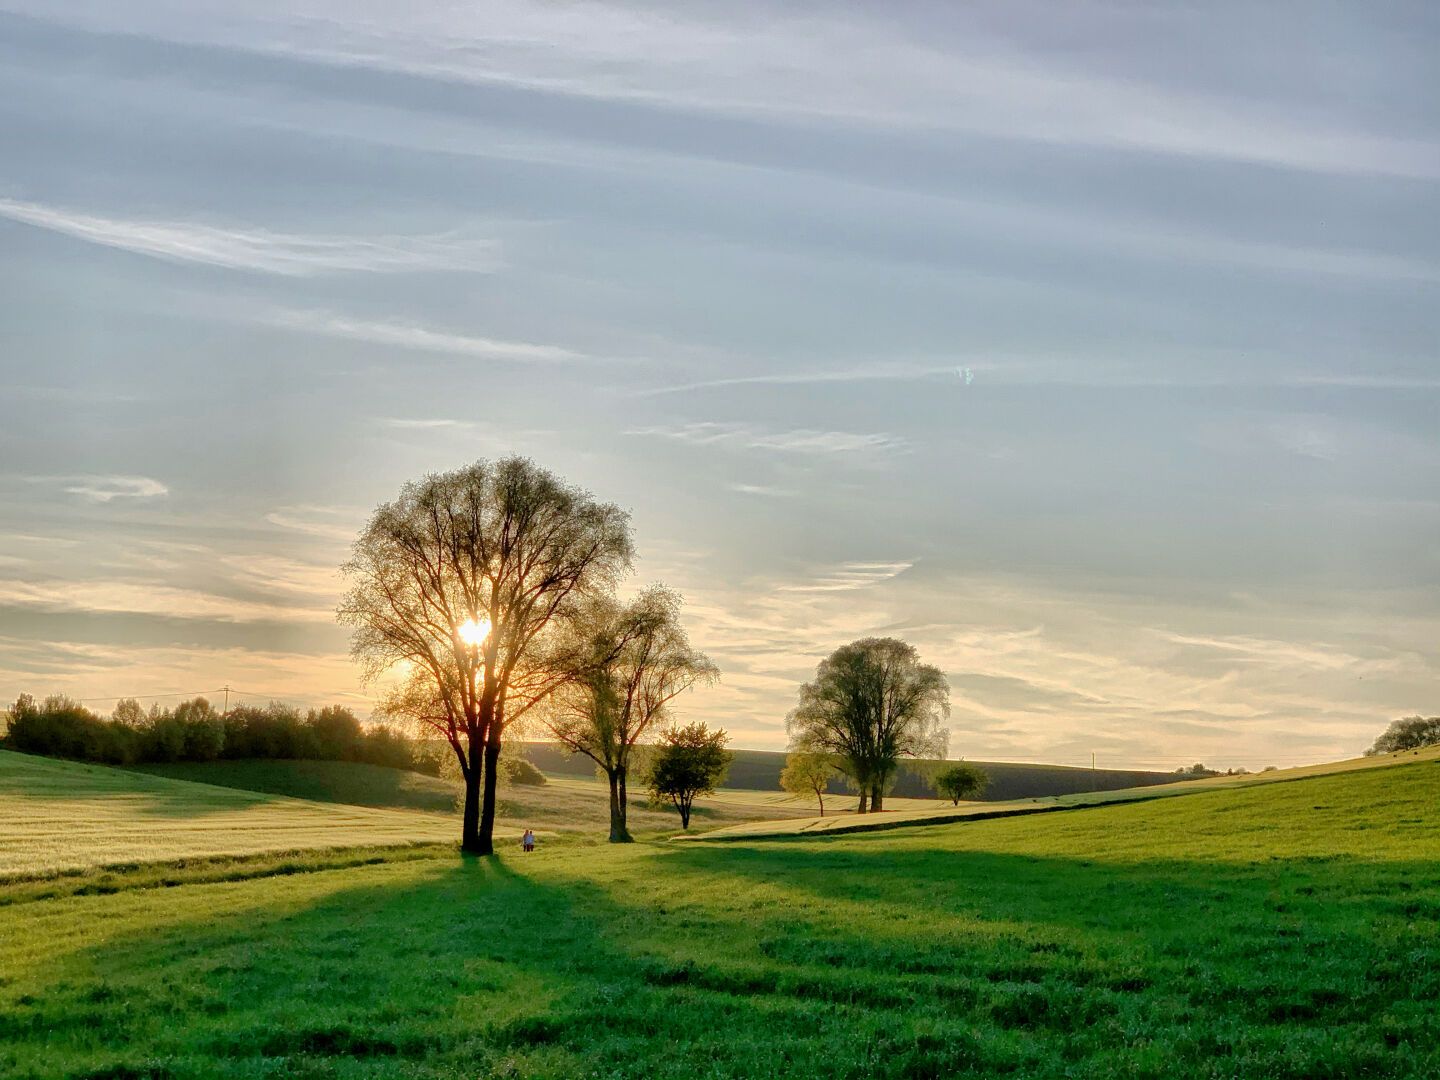 The breath of spring is green...

#landscape #sunrise #photography